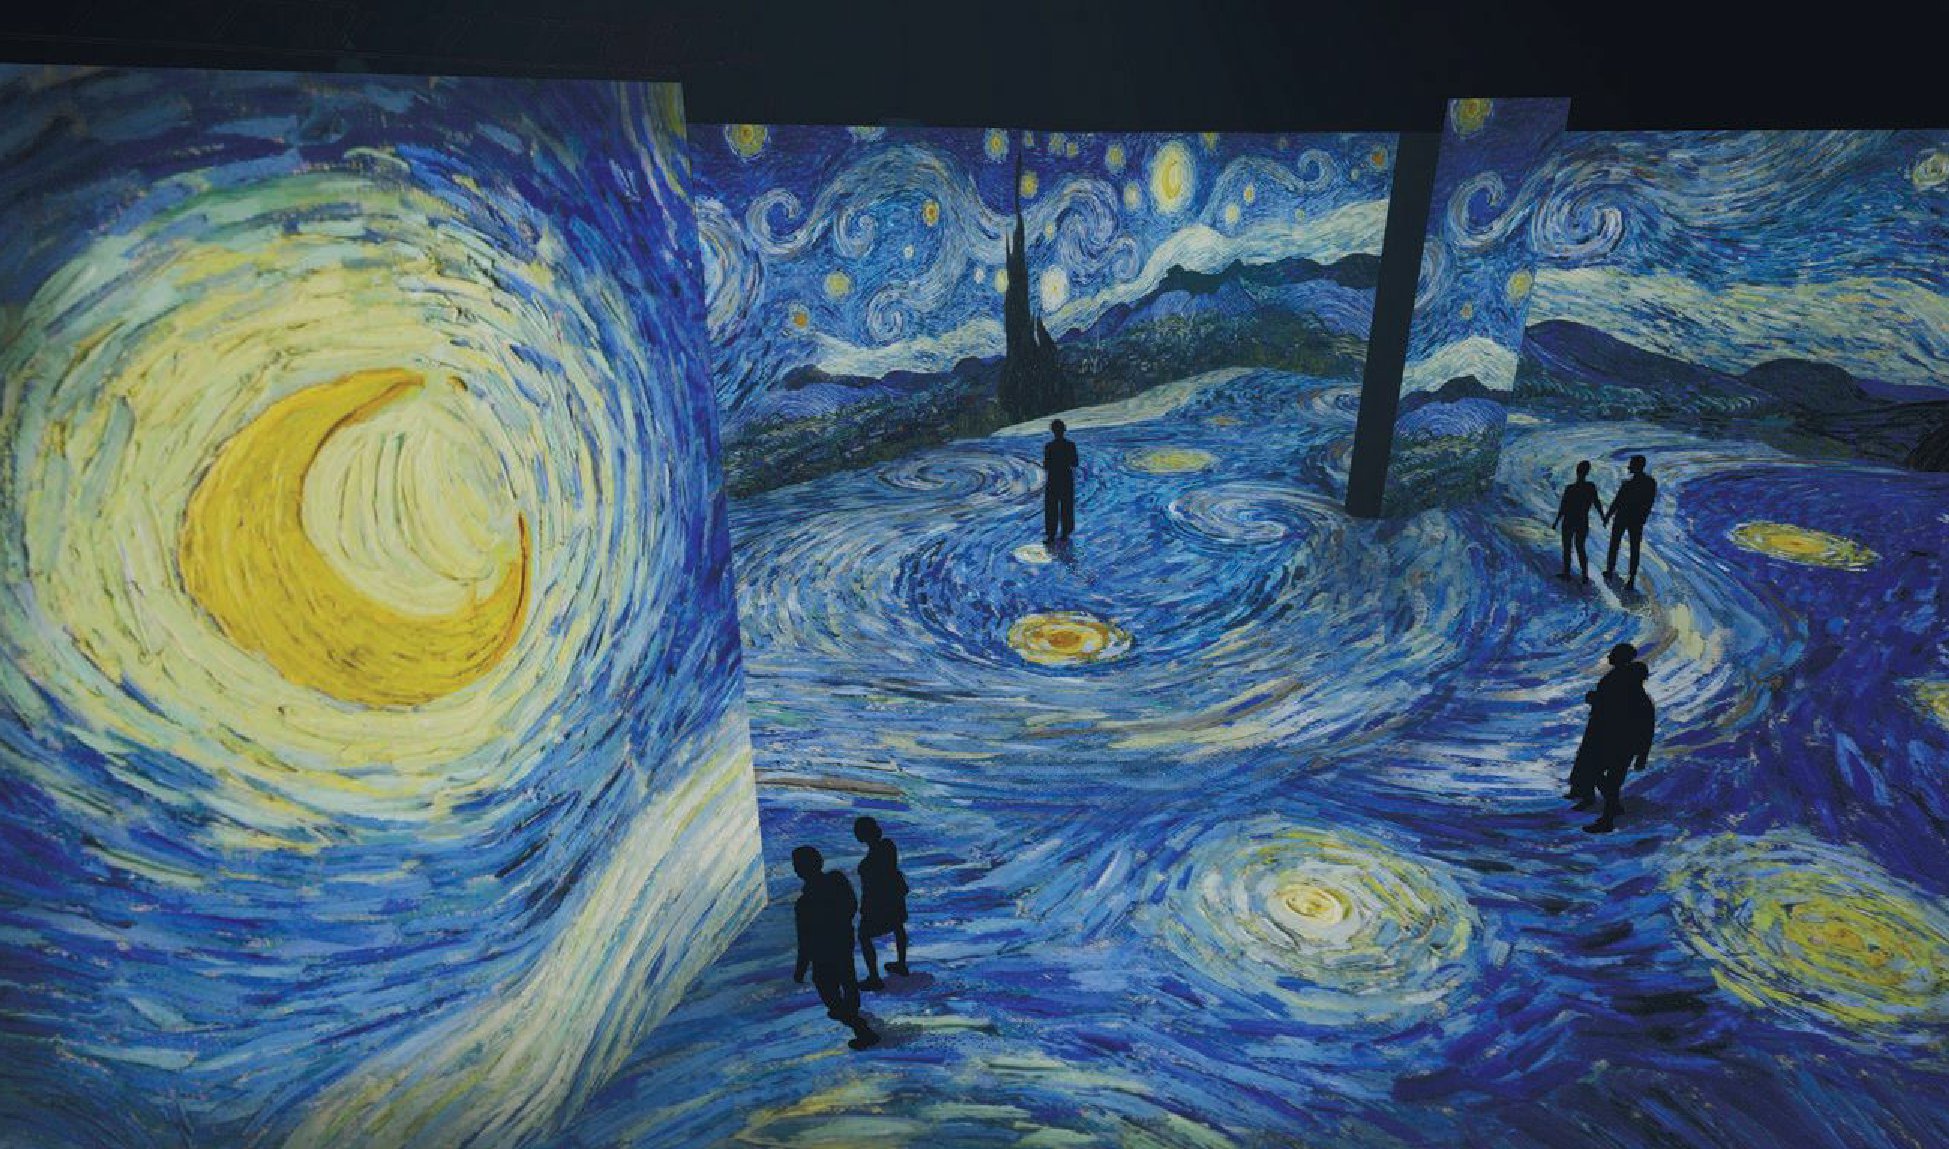 PHOTO COURTESY OF VAN GOGH: AN IMMERSIVE EXPERIENCE